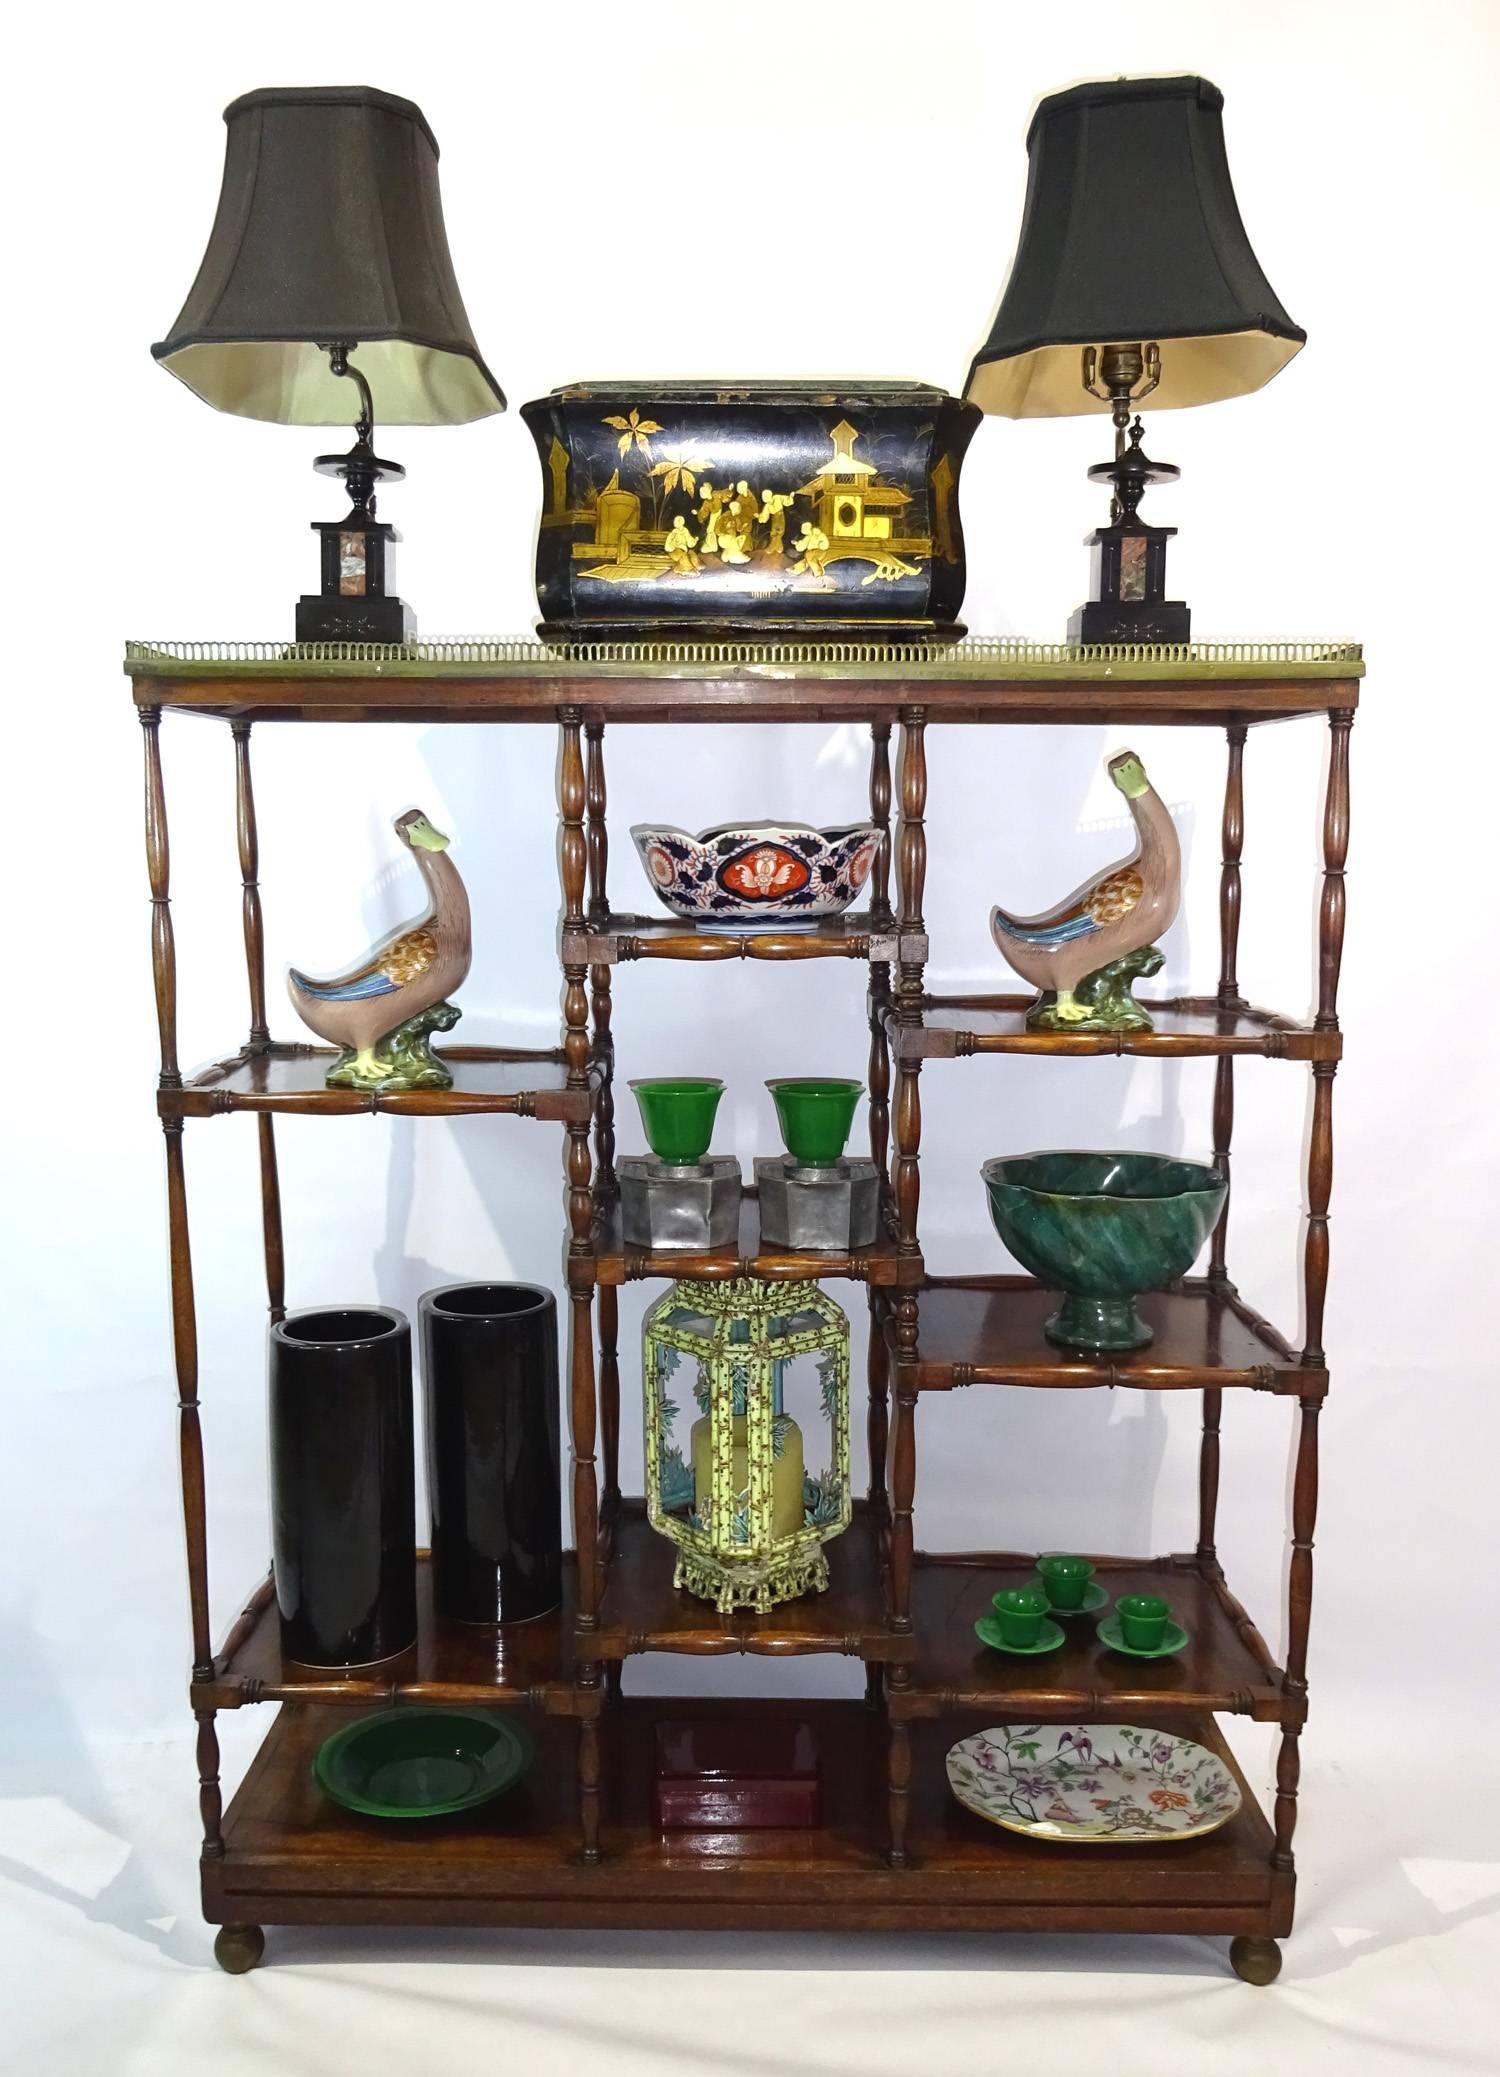 Mid-19th century English mahogany etagere with brass gallery, shaped edges and uprights and raised on ball feet. The mahogany finish has an excellent patina.